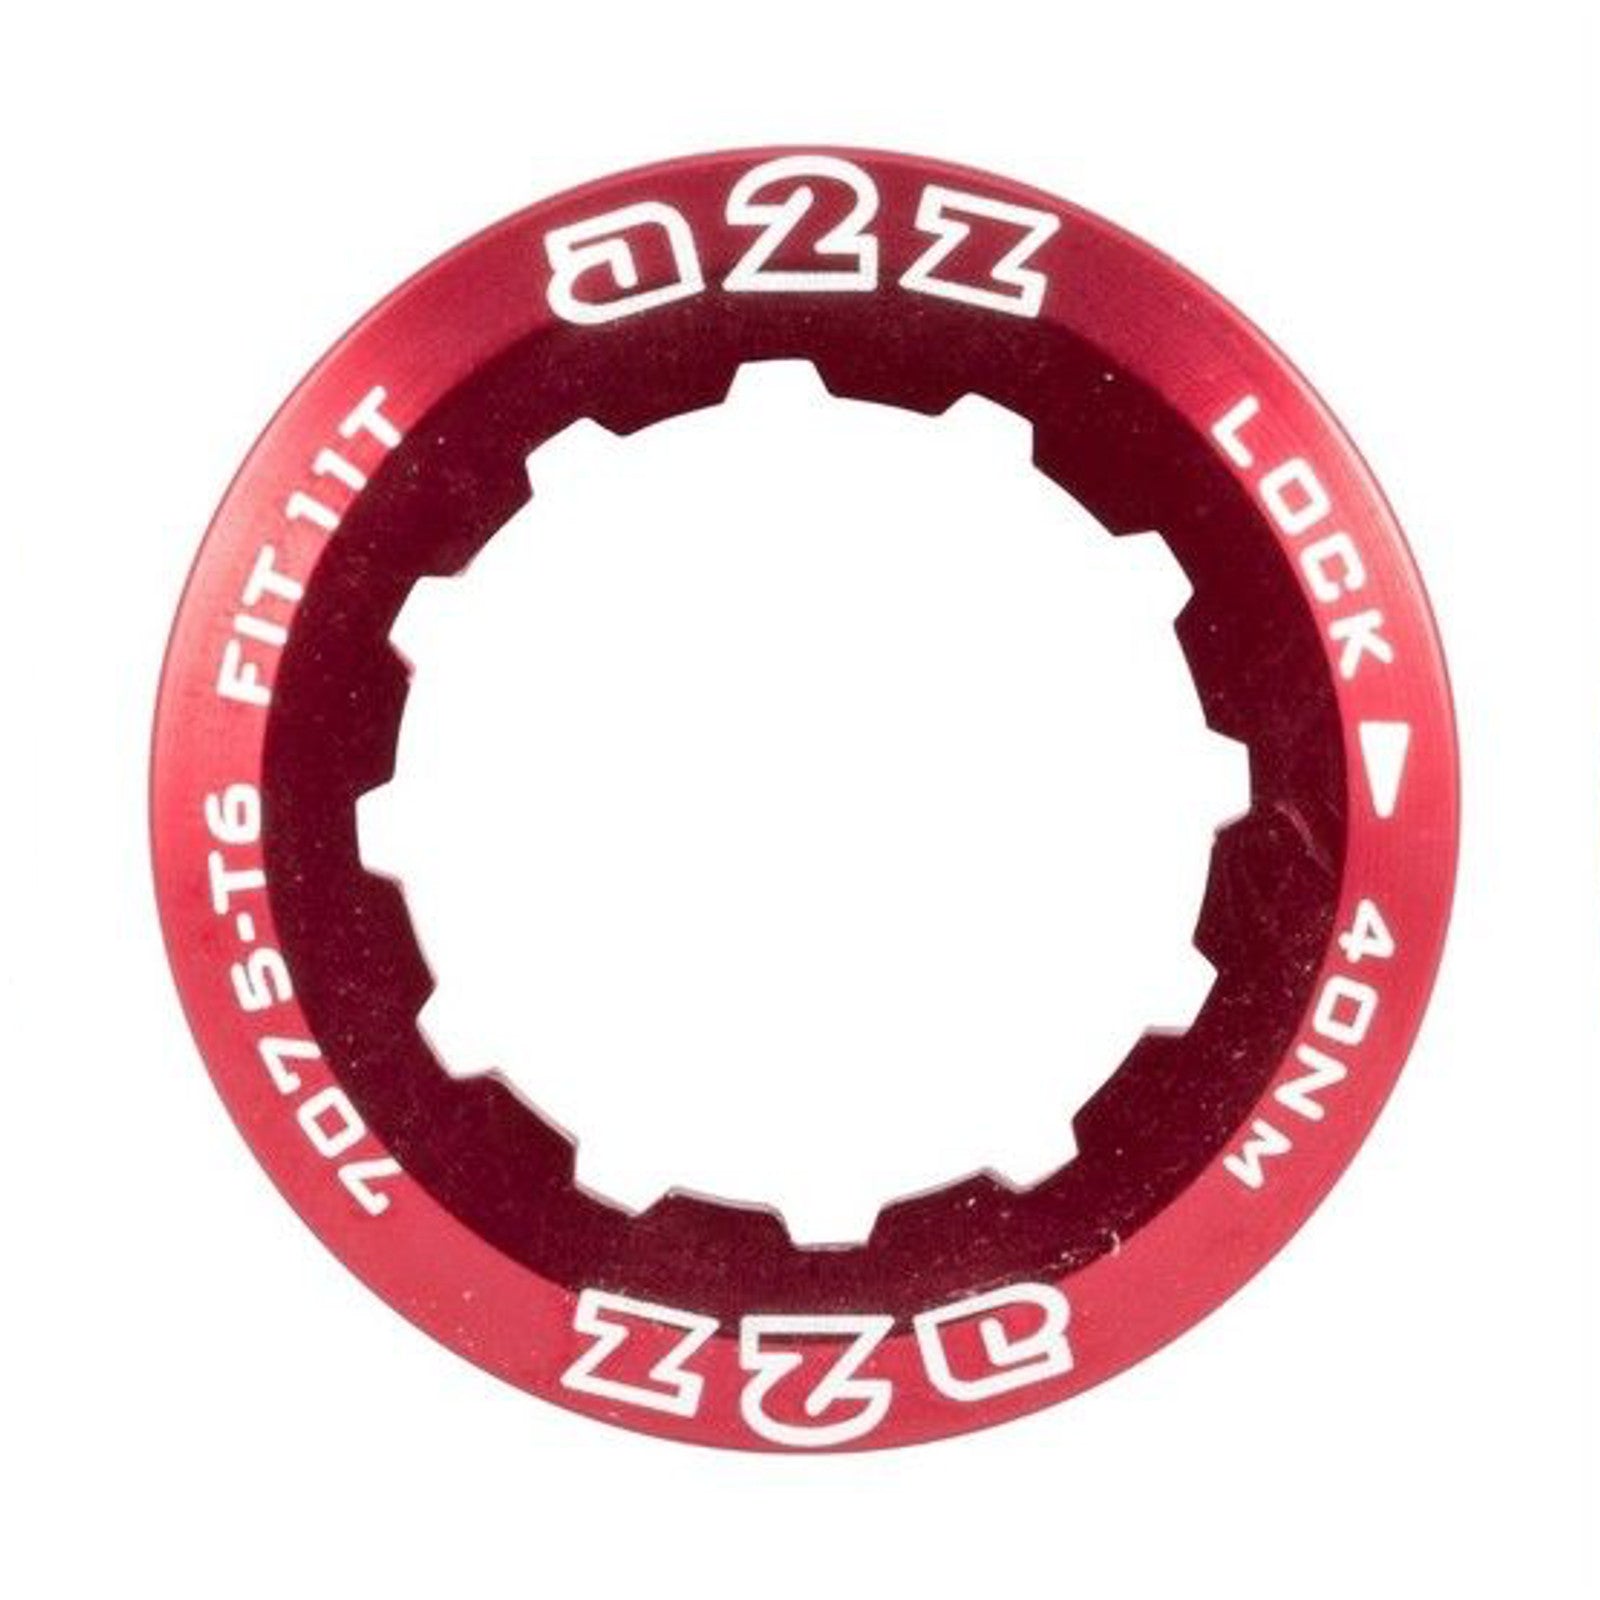 A2Z Lockring for Sram or Shimano Cassette 11t Small Ring - Red